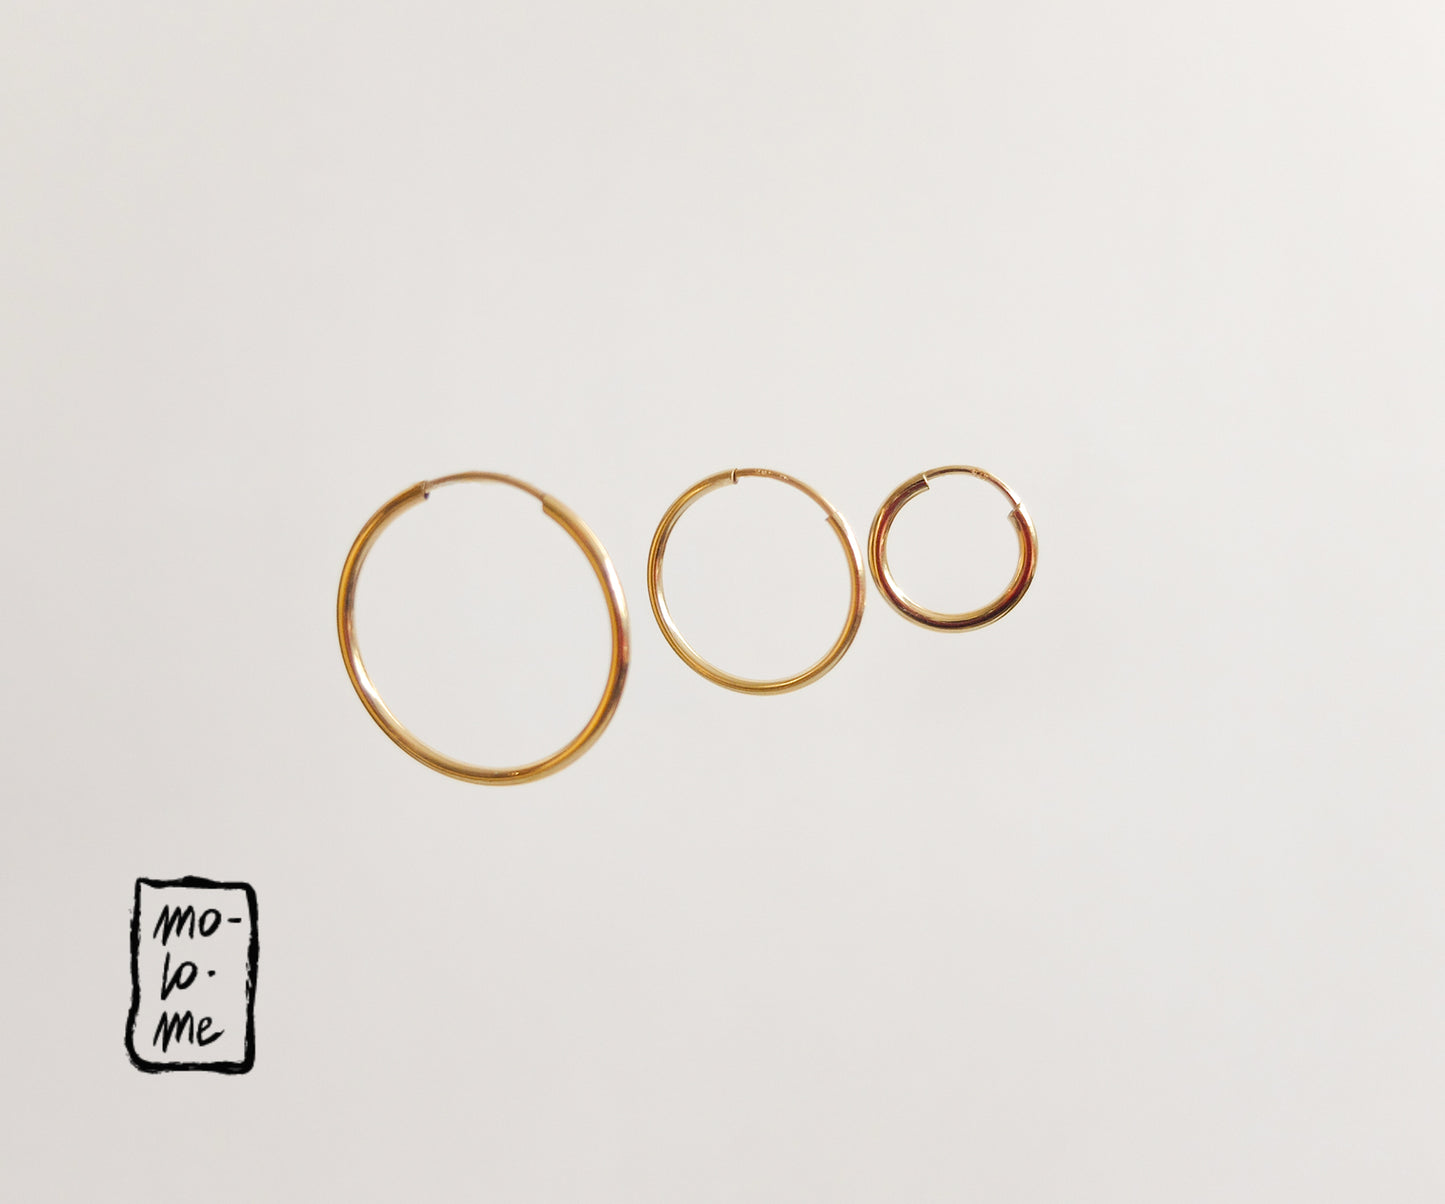 9 carat Gold Small, Medium and Large Simple Hoop Earrings by Molo Me